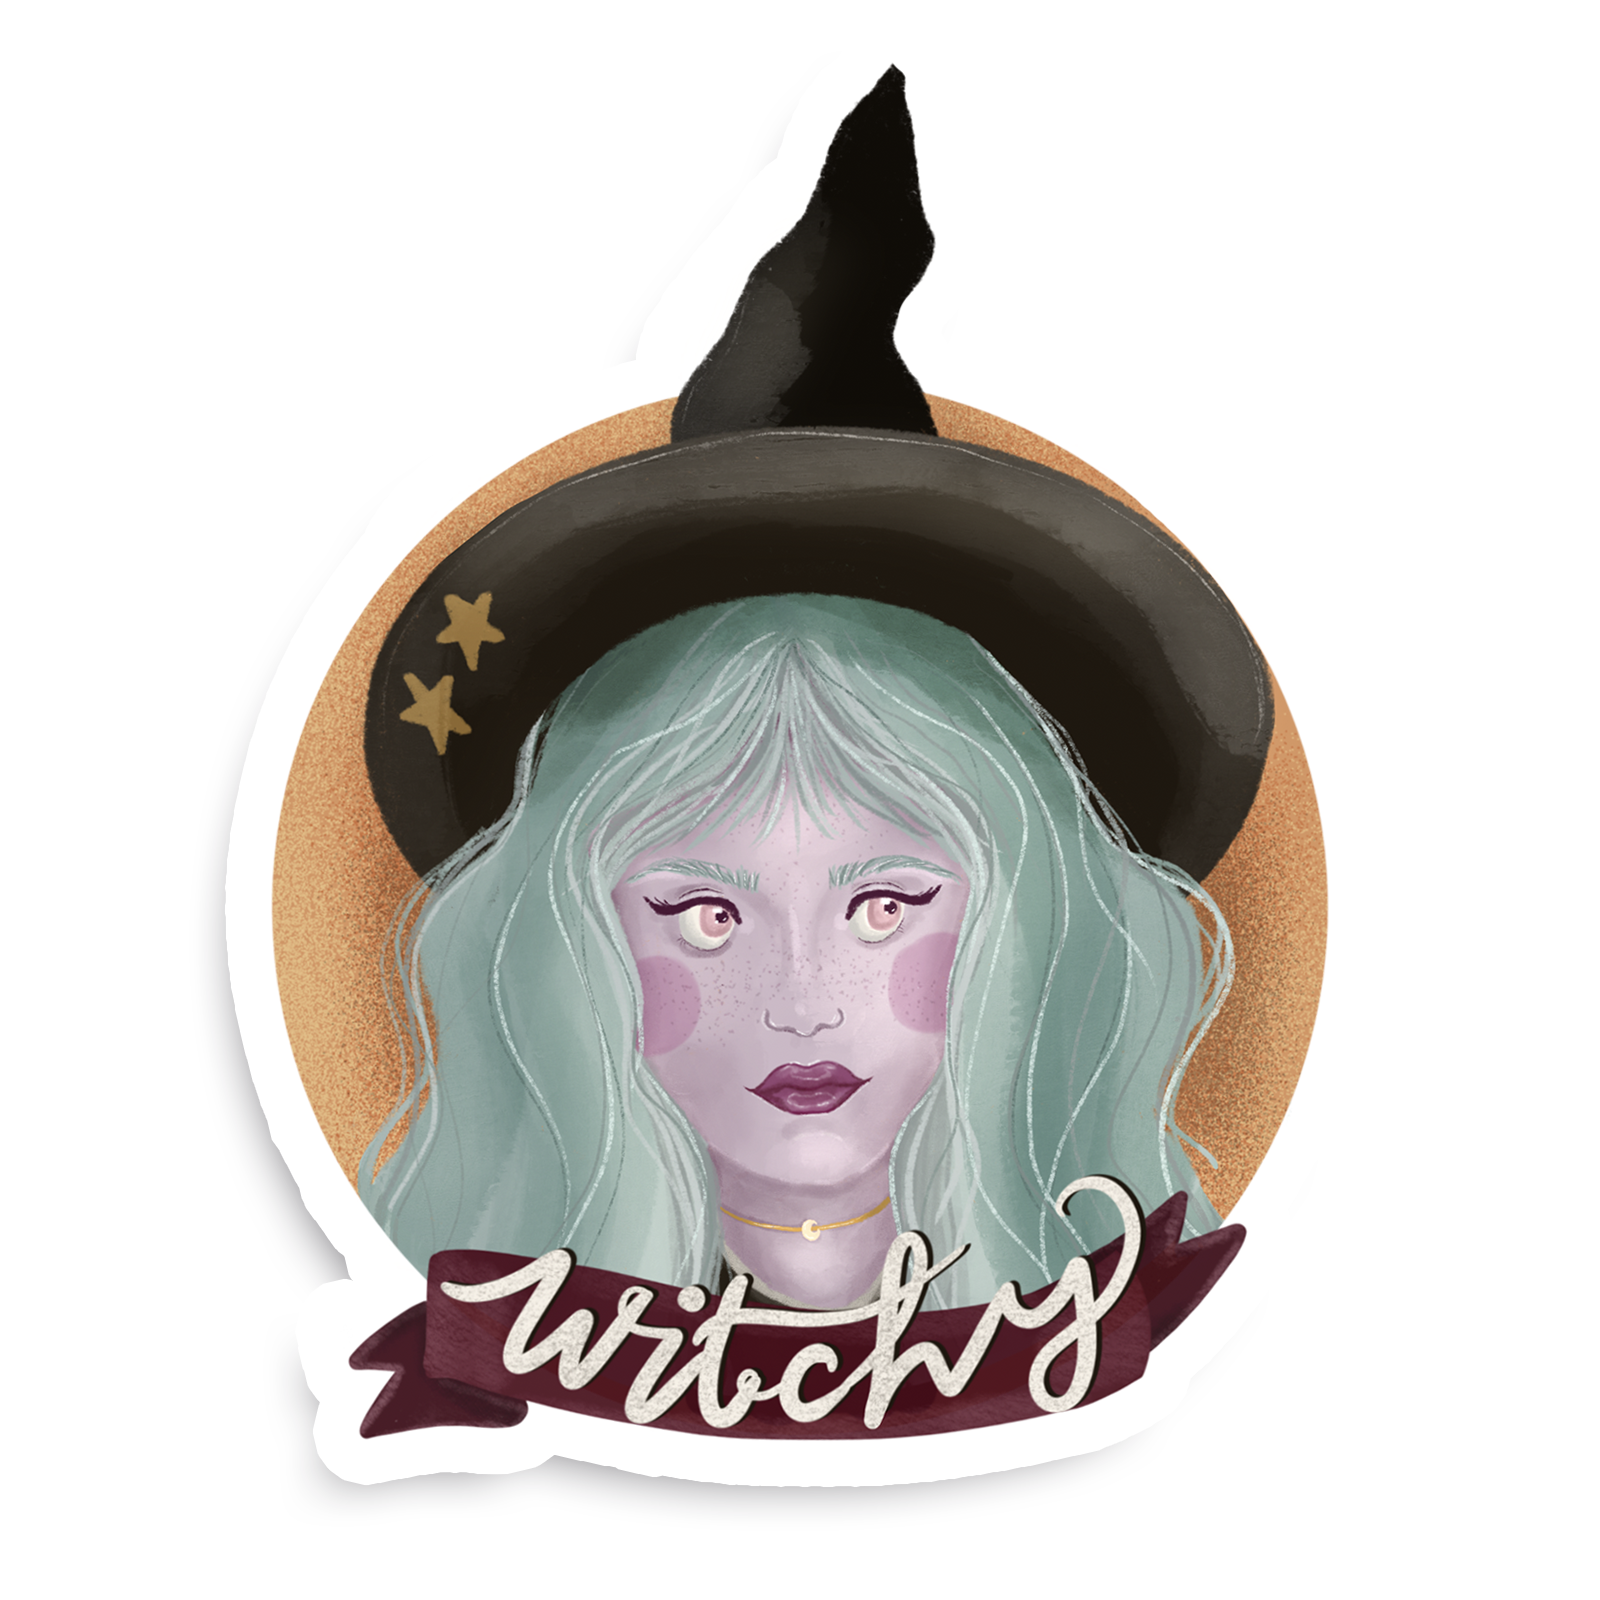 Cute Witchy Doodle Sticker Sheet for Bullet Journals Stickers - Studio Maddy